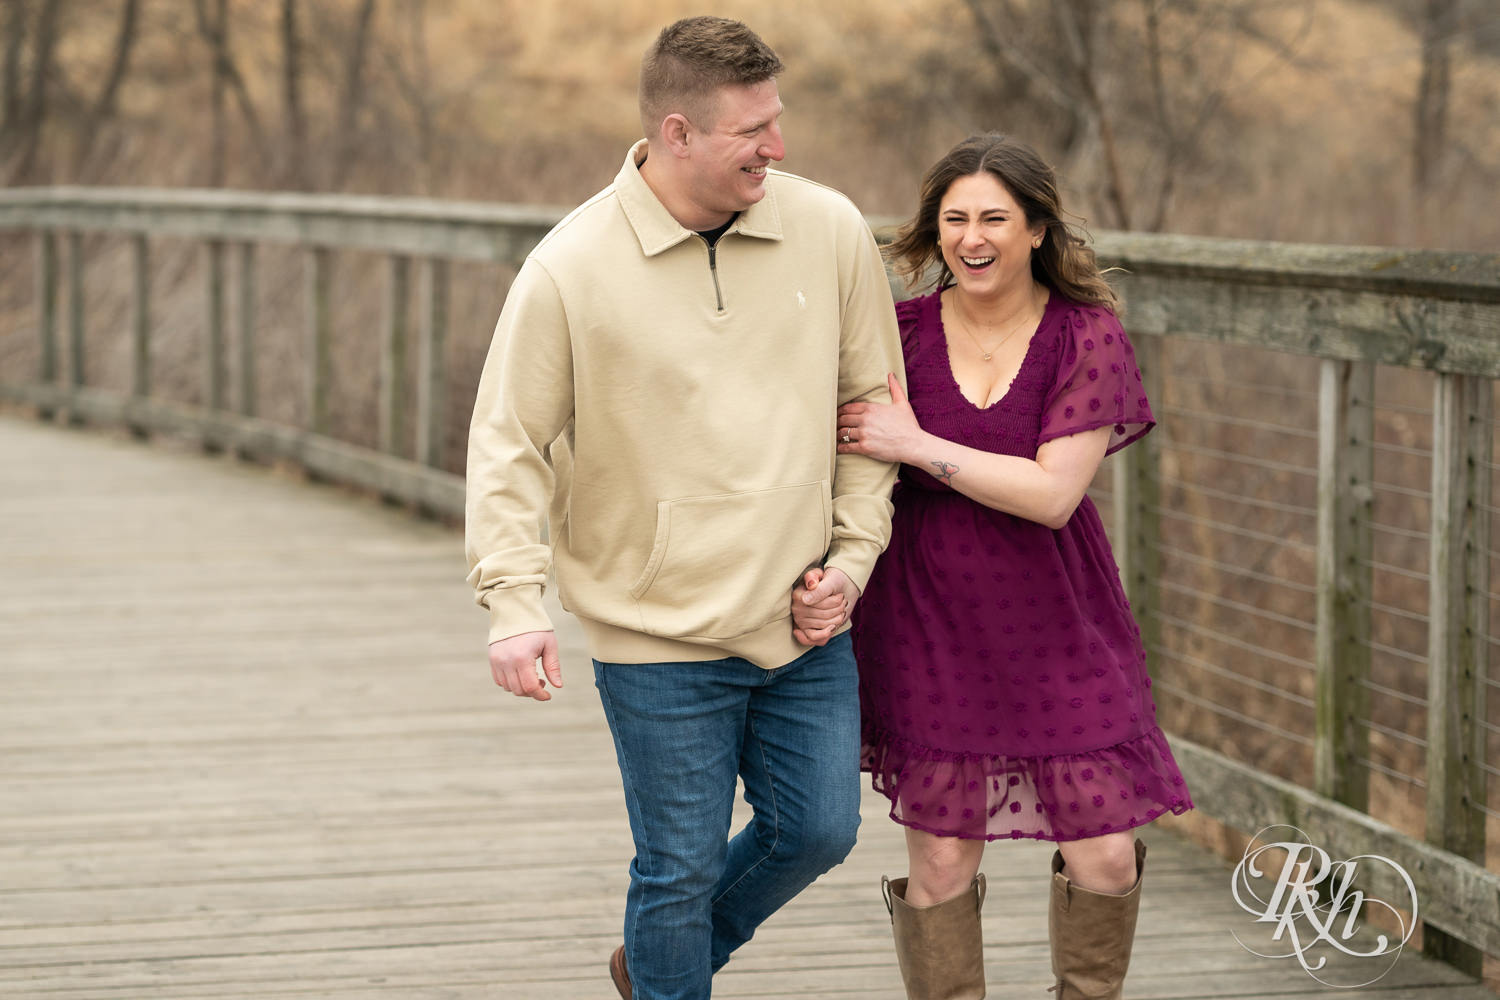 Man in jeans and woman in magenta dress laugh while walking on a bridge in Lebanon Hills in Eagan, Minnesota.